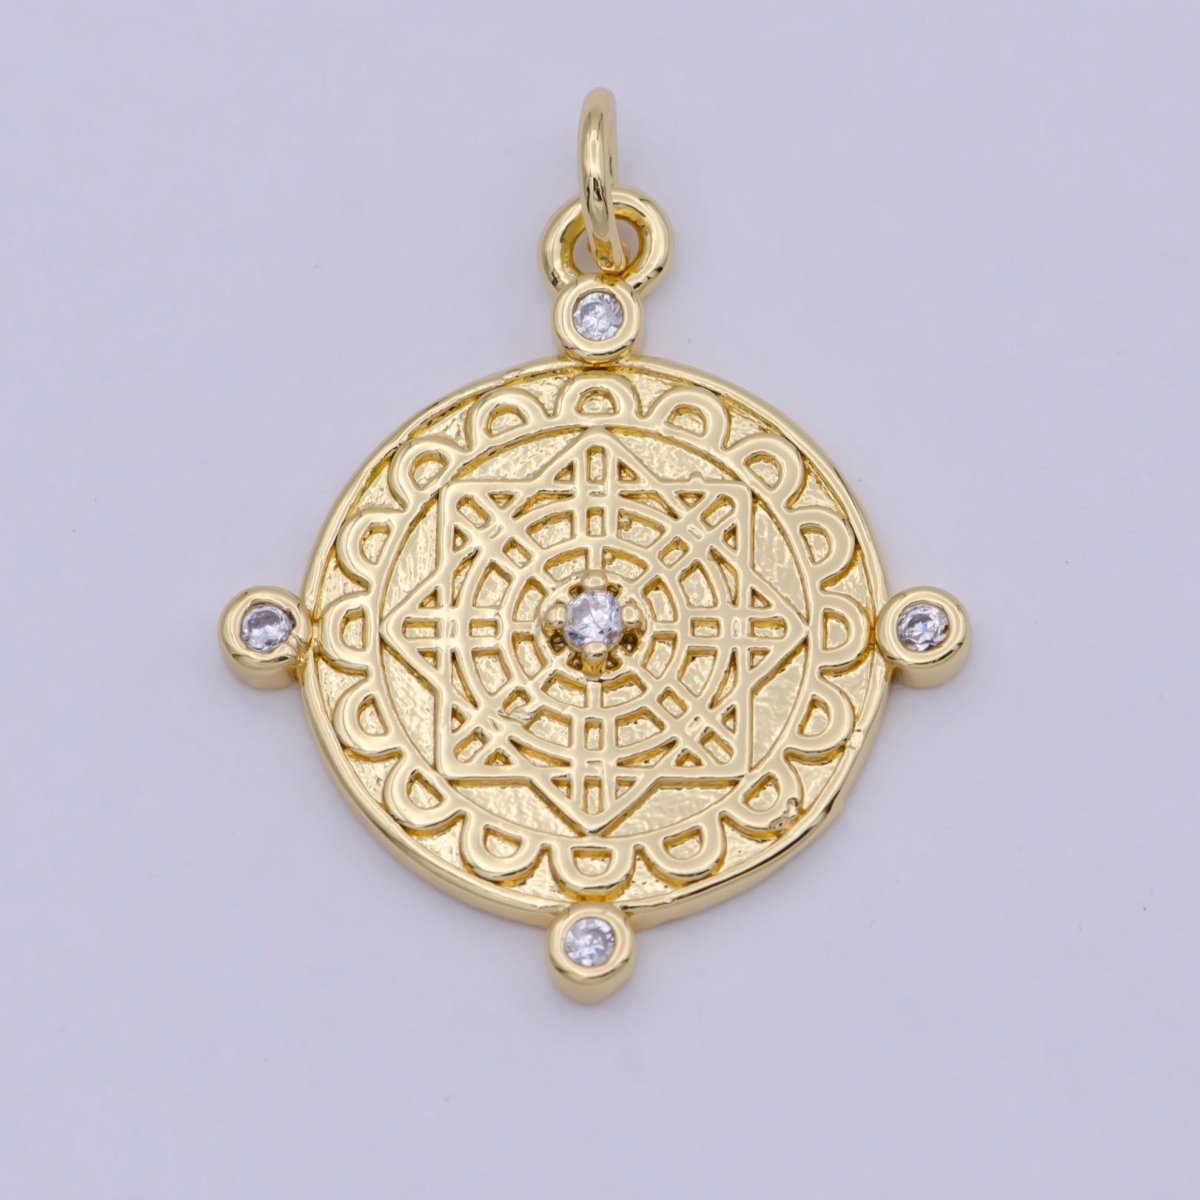 Compass Pendant, cubic zirconia cz diamonds, 14K Gold Filled, medallion pendant for Necklace Jewelry Making W-170 - DLUXCA